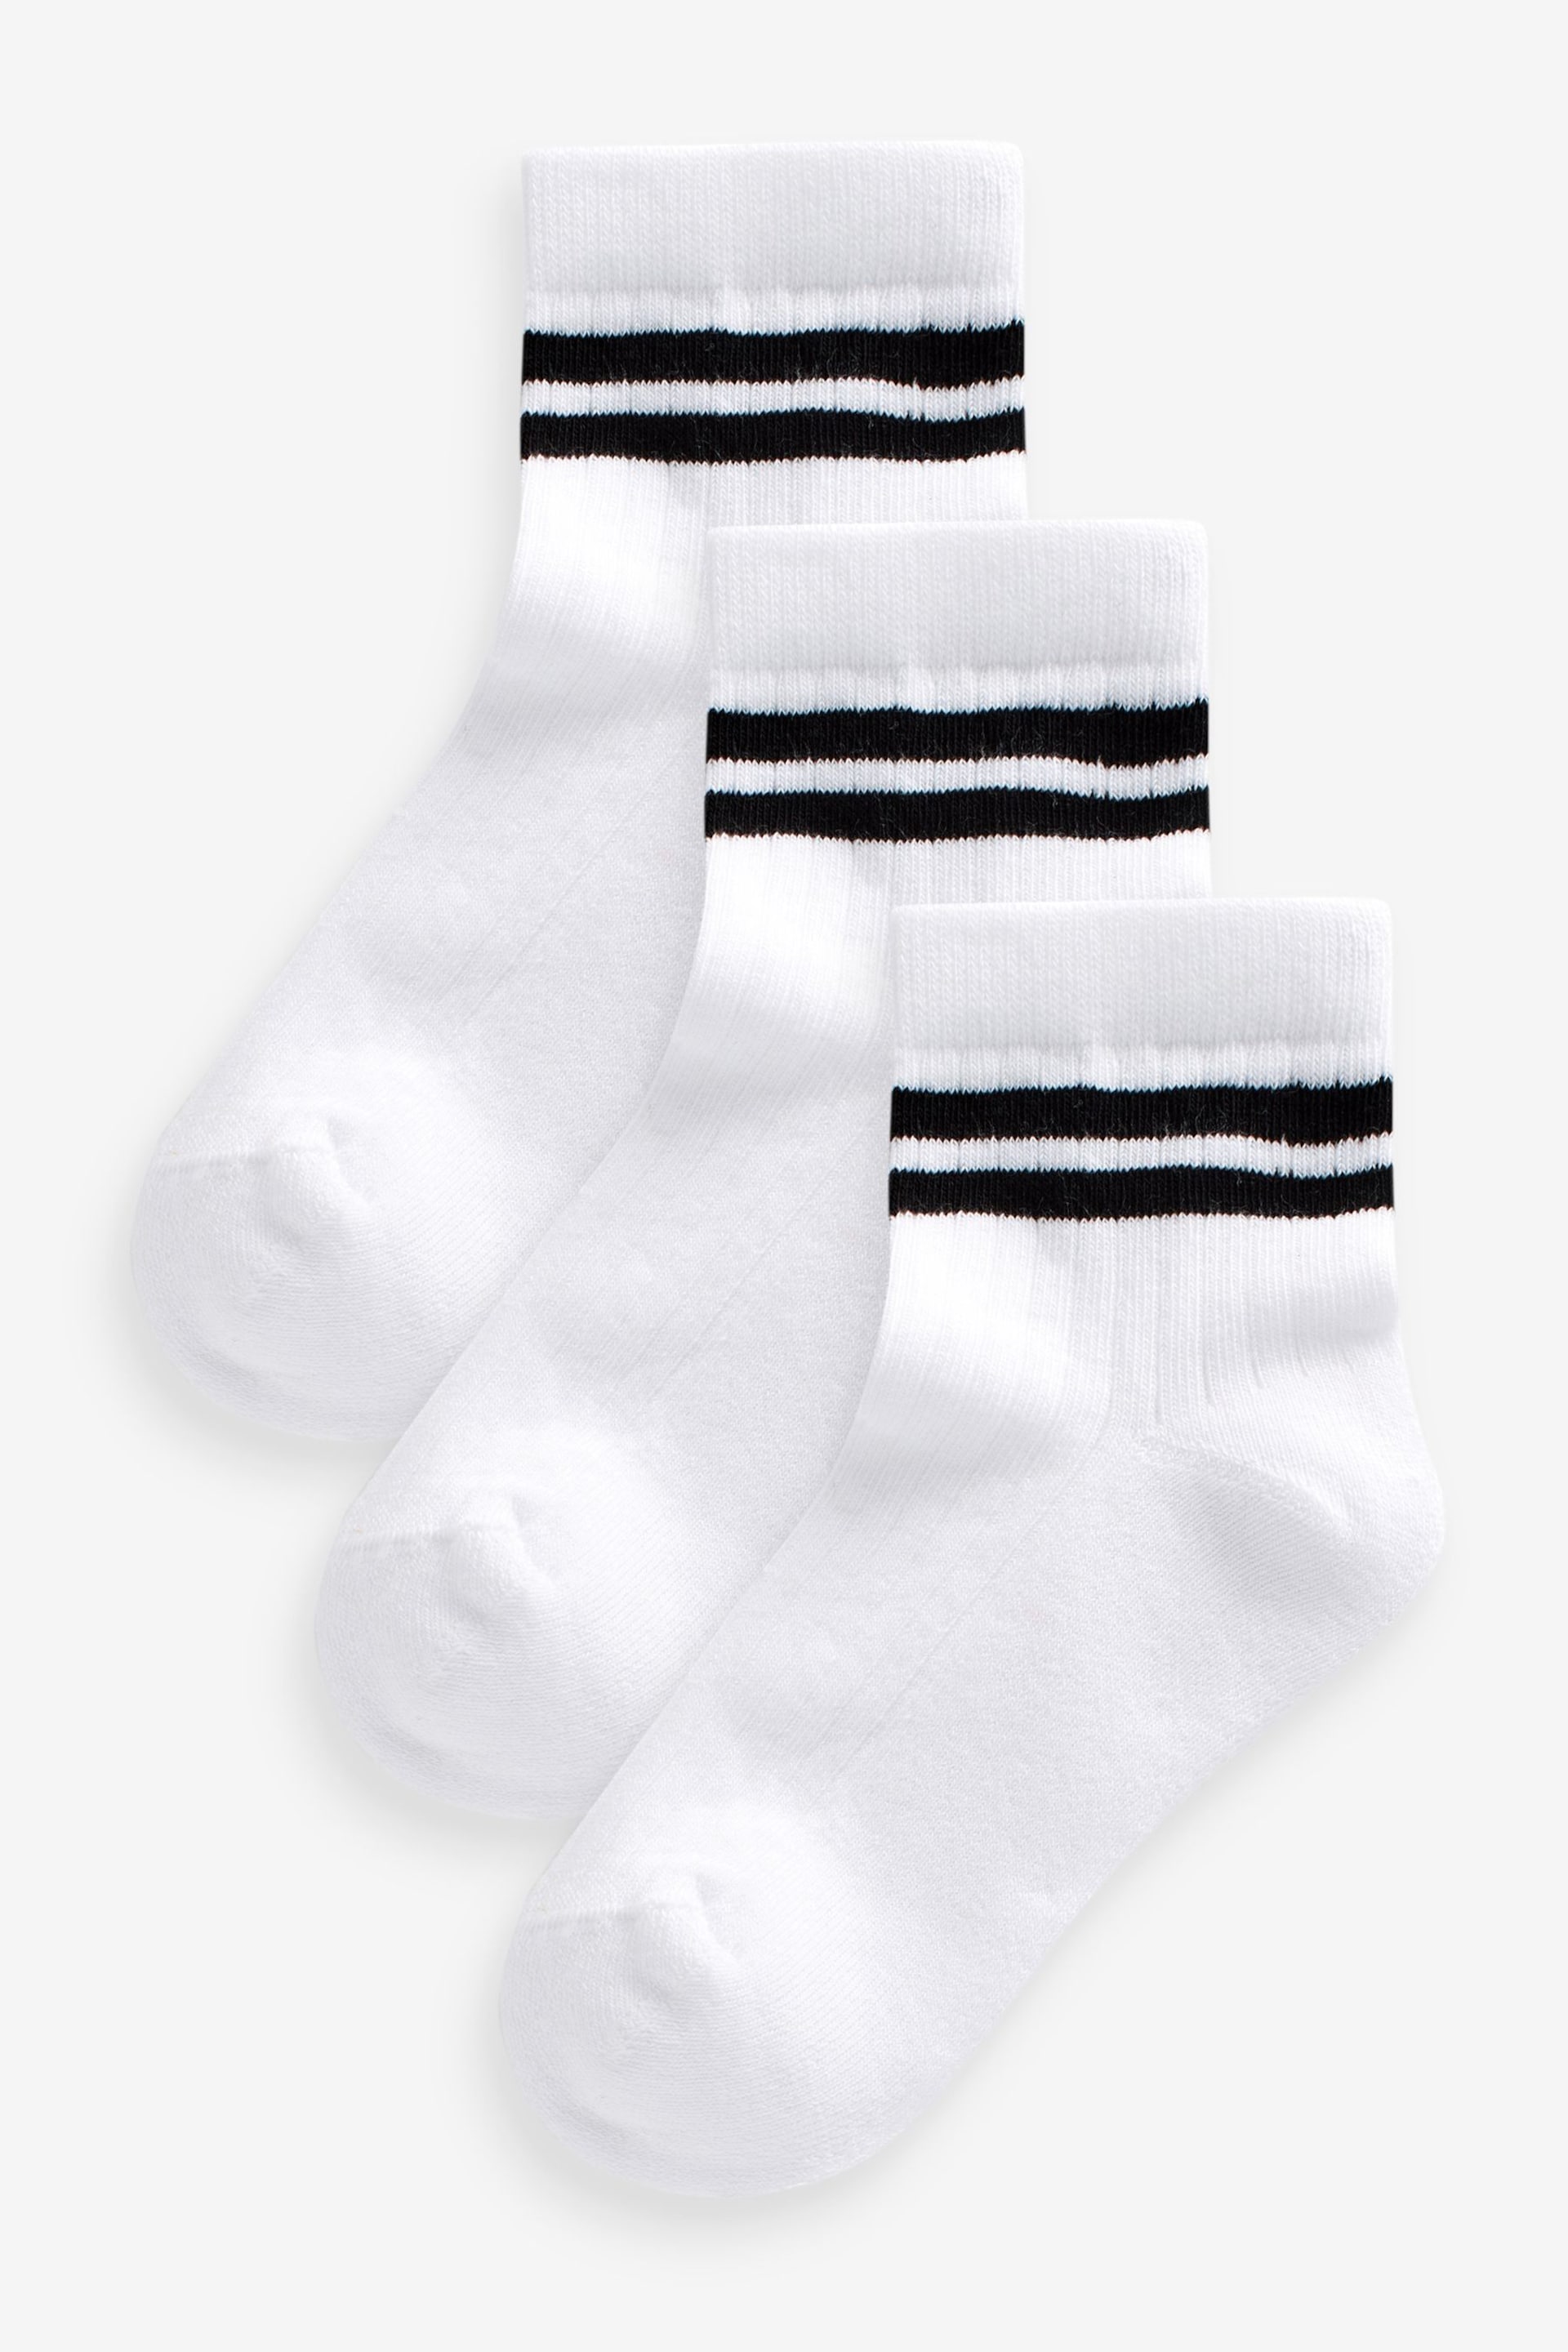 White Black Stripe Cropped Length Cotton Rich Cushioned Sole Ankle Socks 3 Pack - Image 1 of 2